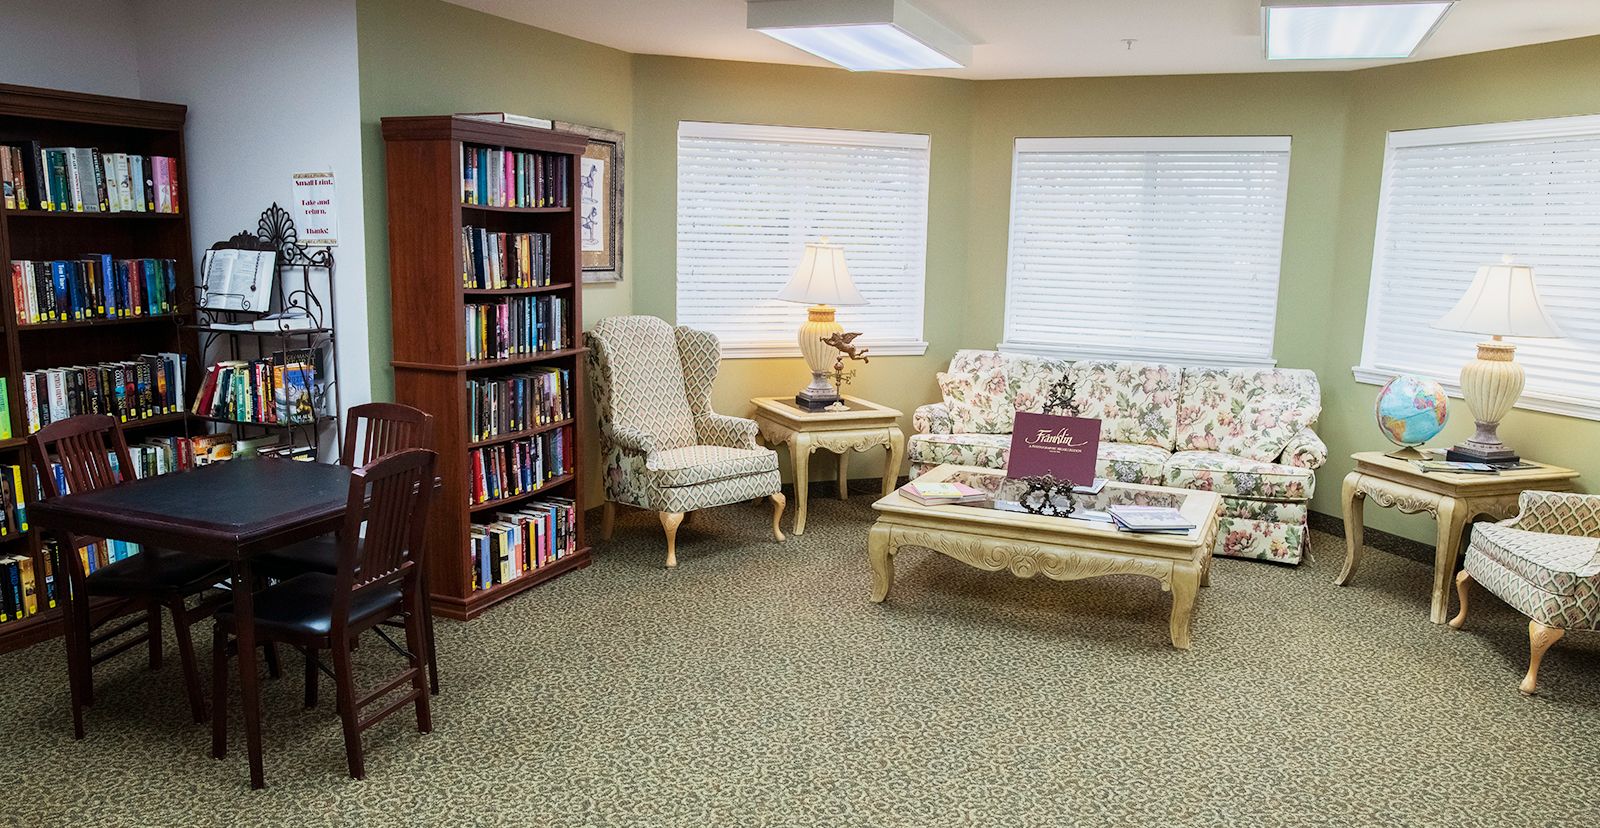 Interior view of Manor at Steeplechase senior living community featuring a cozy living room with bookcase and furniture.